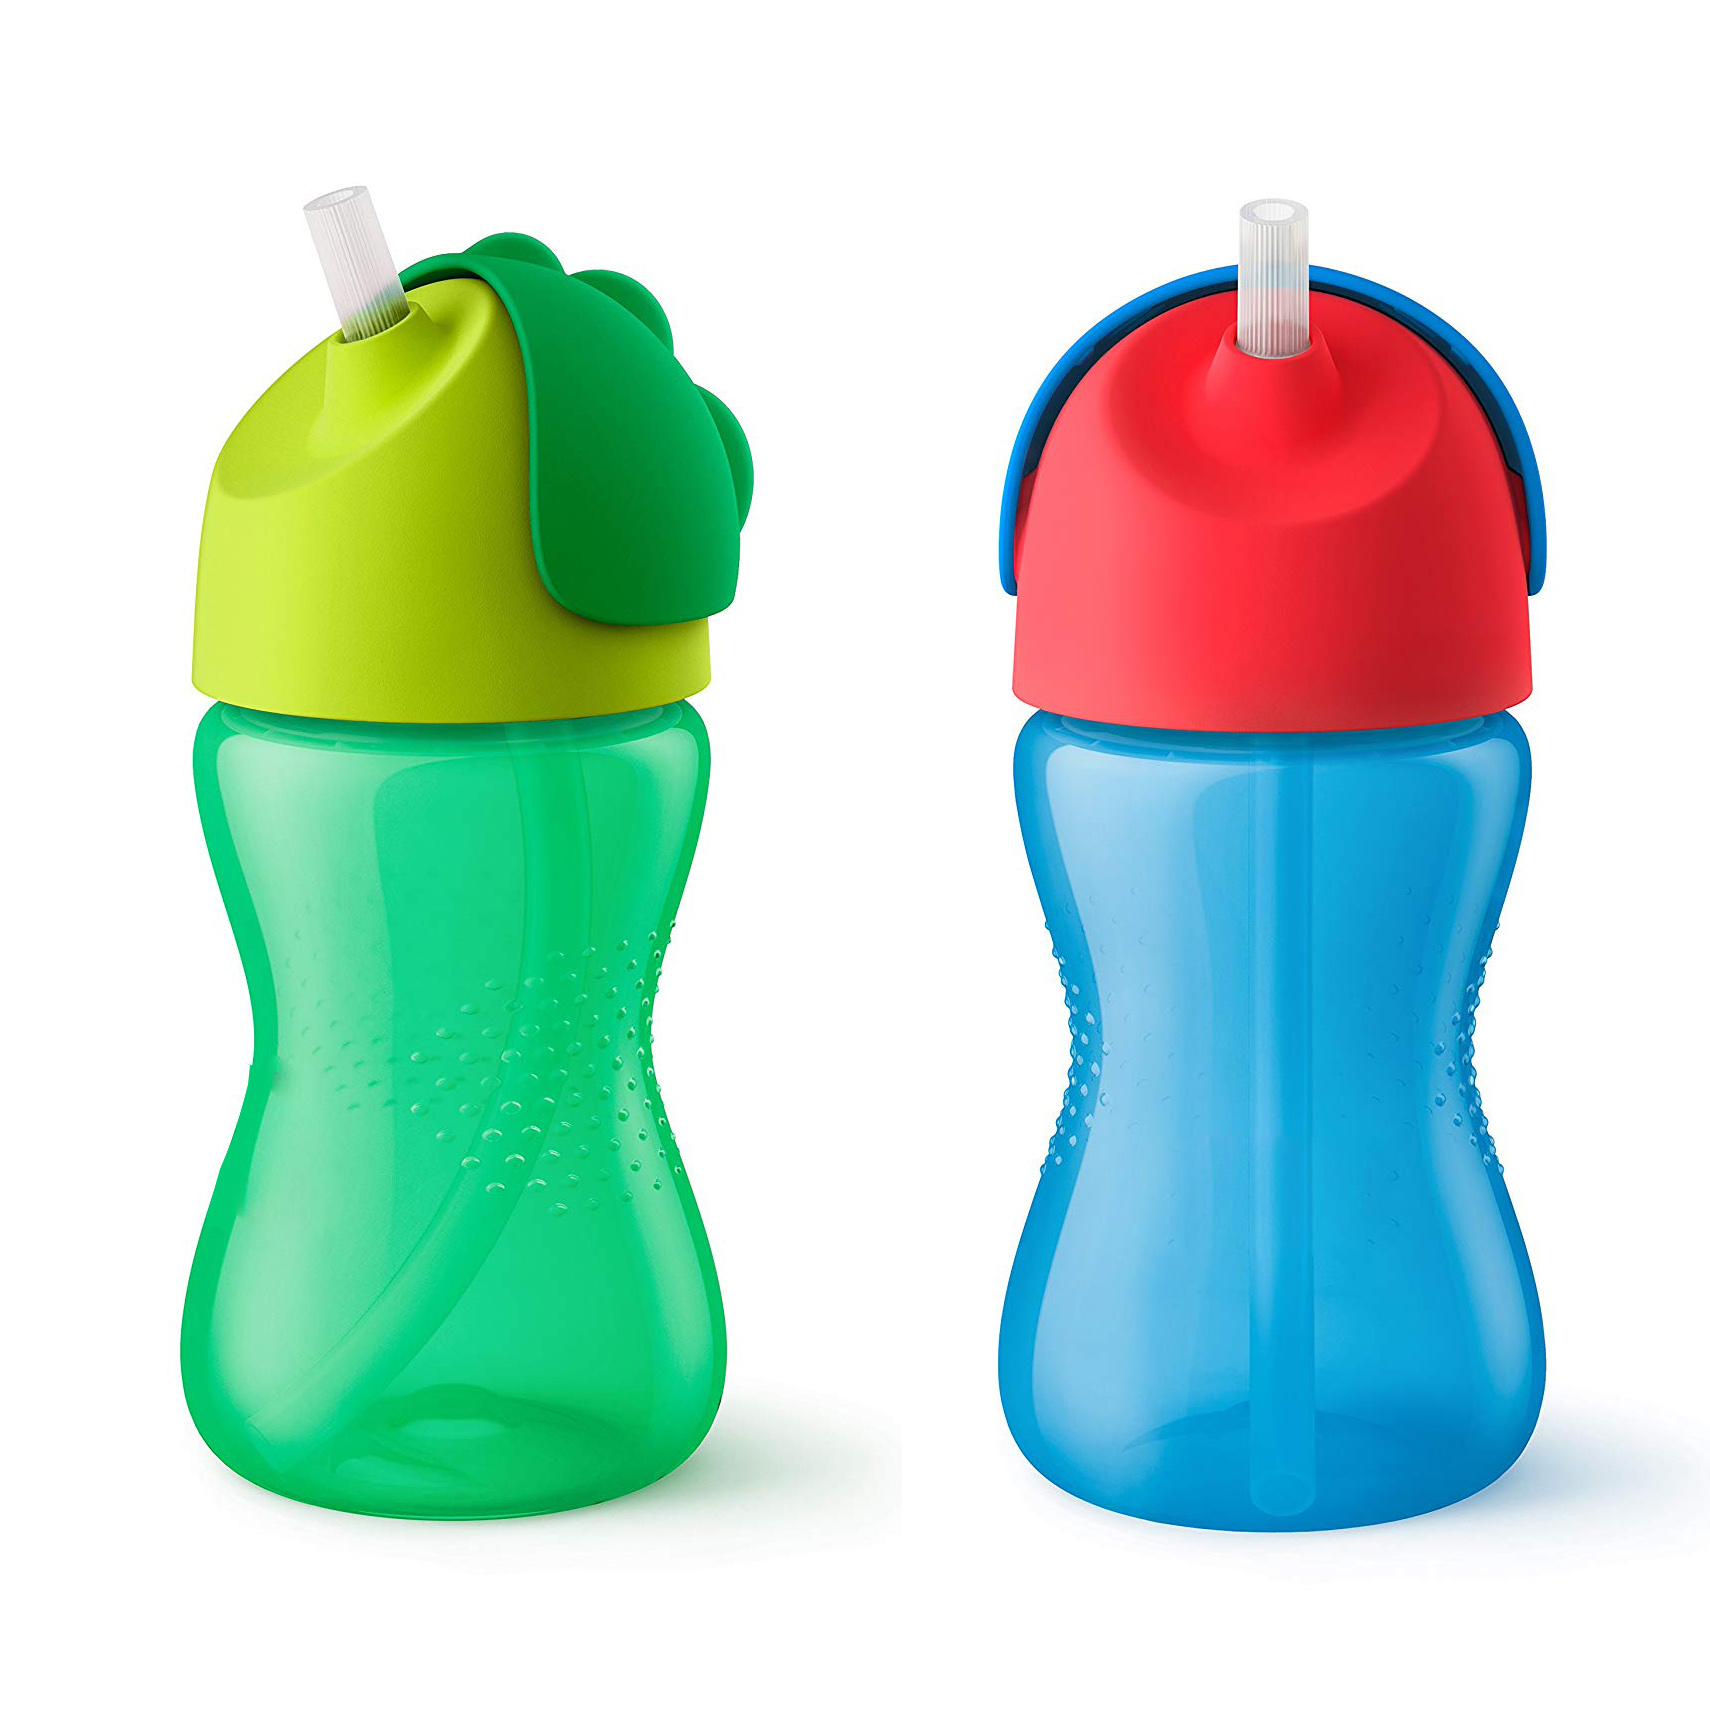 Best-Selling Silica Gel Water Bottle, Straw Cup, 10 oz (About 283.49 g), Silicone Water Spray Bottles, 2pk, Blue  Green